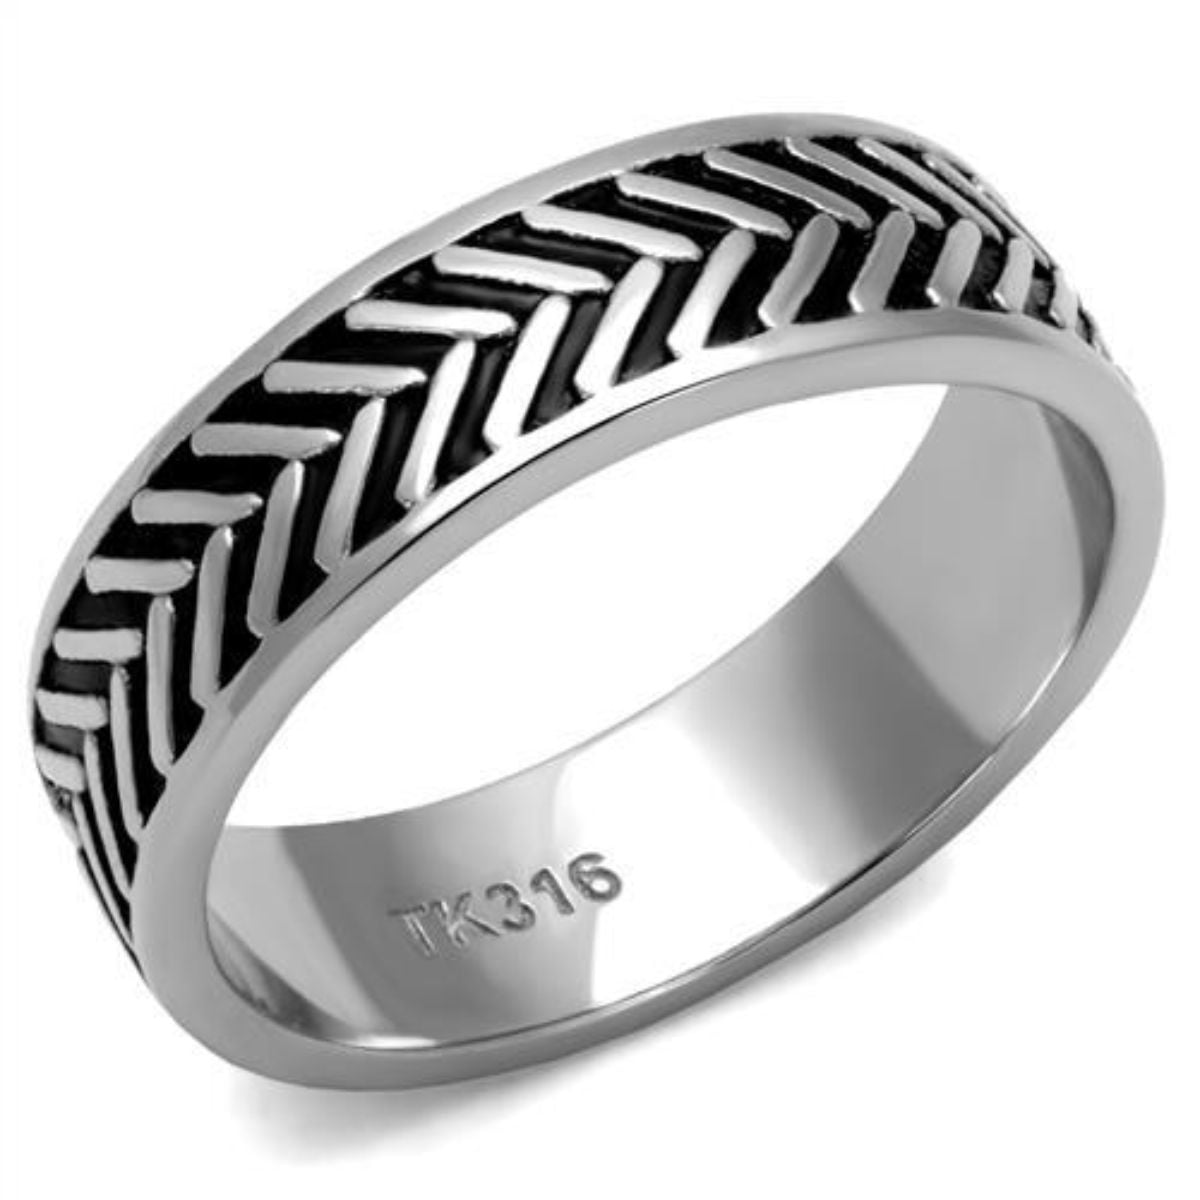 Luxe Jewelry Designs Men's Stainless Steel High Polished Ring, Size 9 ...